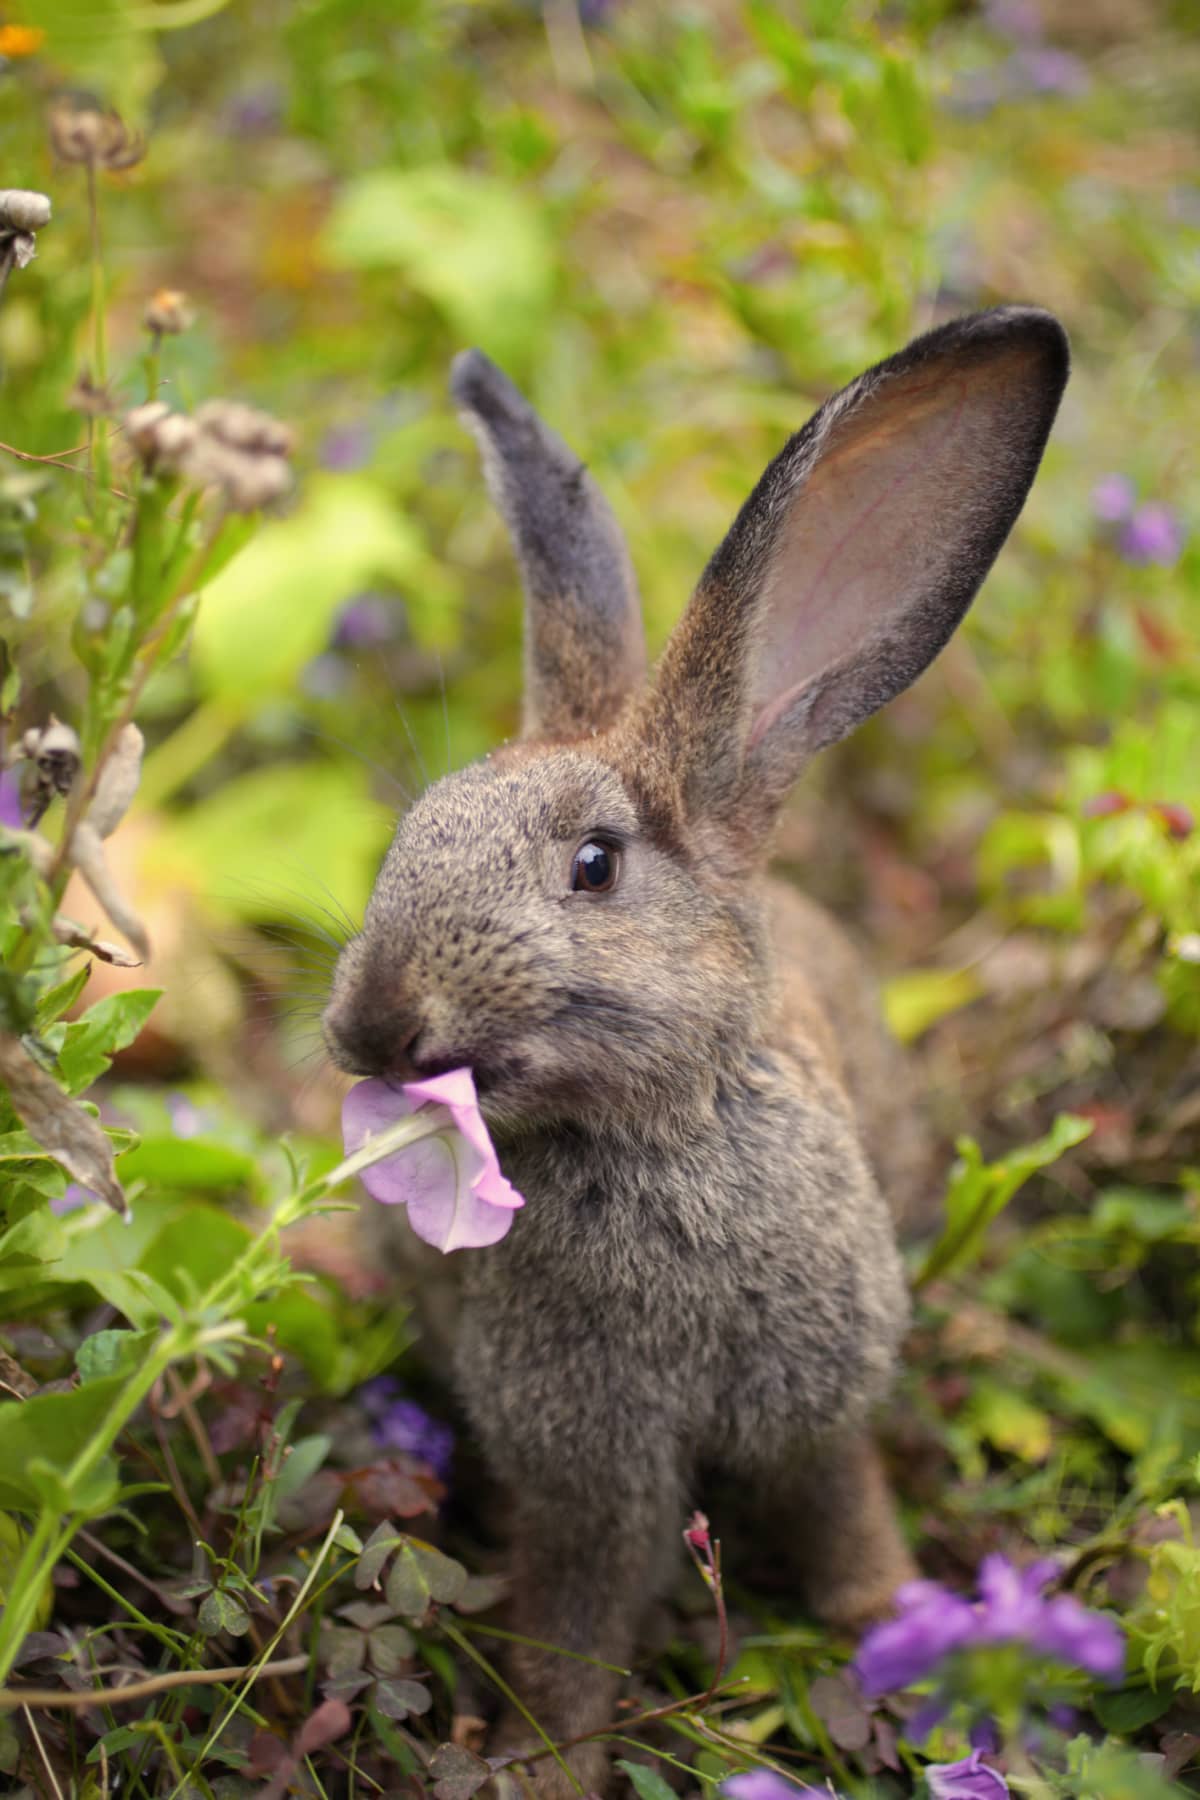 A brown bunny eating a petunia flower